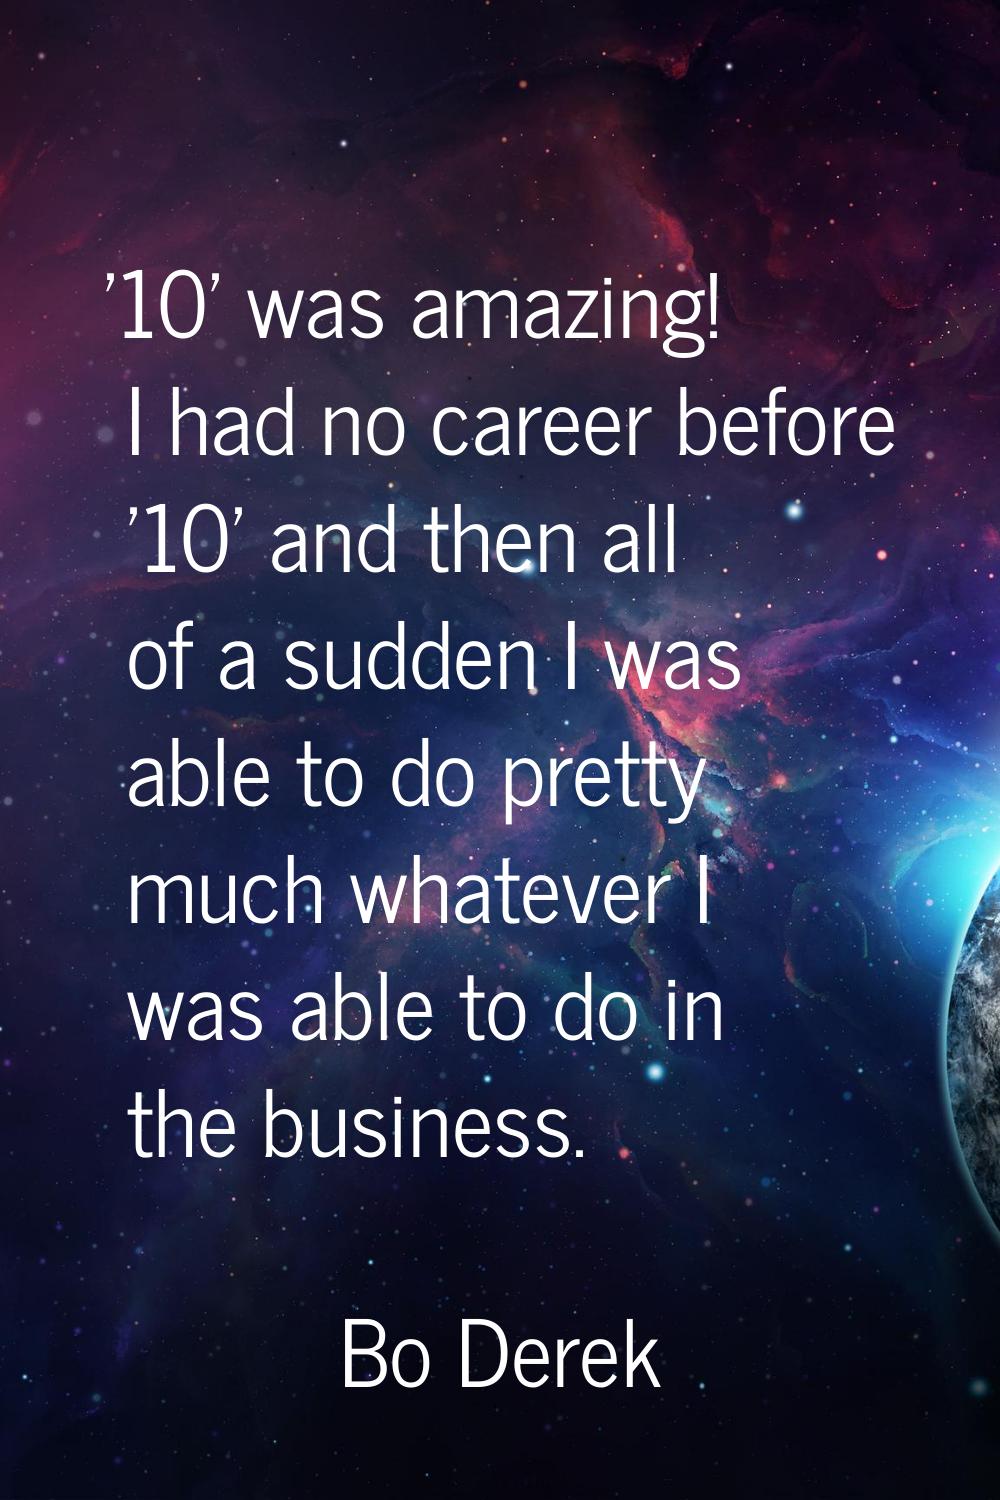 '10' was amazing! I had no career before '10' and then all of a sudden I was able to do pretty much